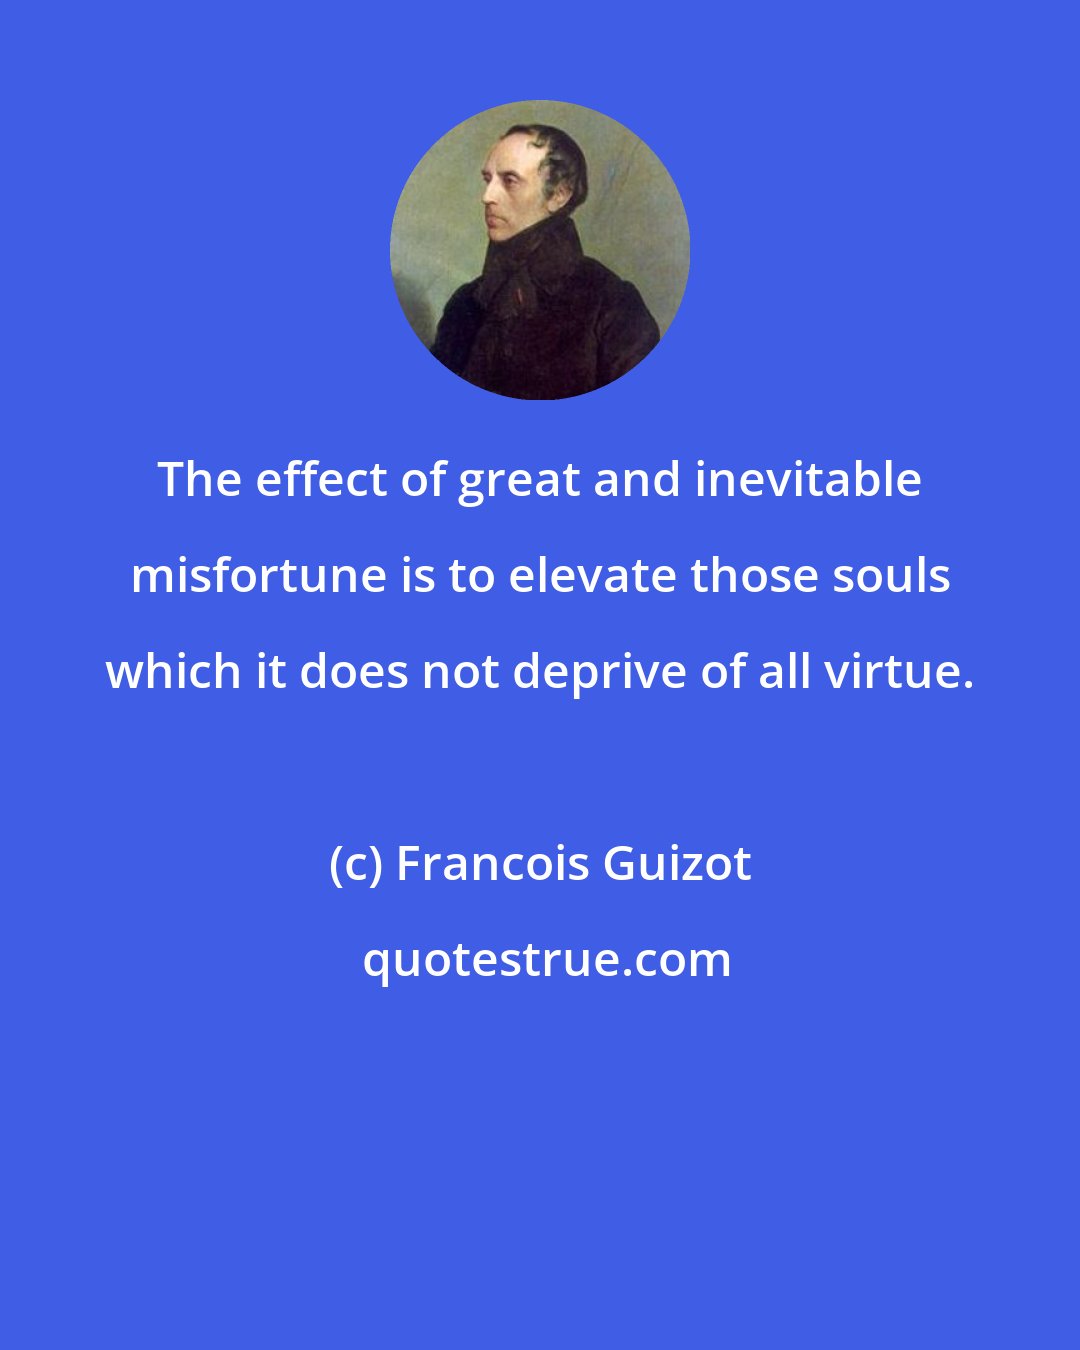 Francois Guizot: The effect of great and inevitable misfortune is to elevate those souls which it does not deprive of all virtue.